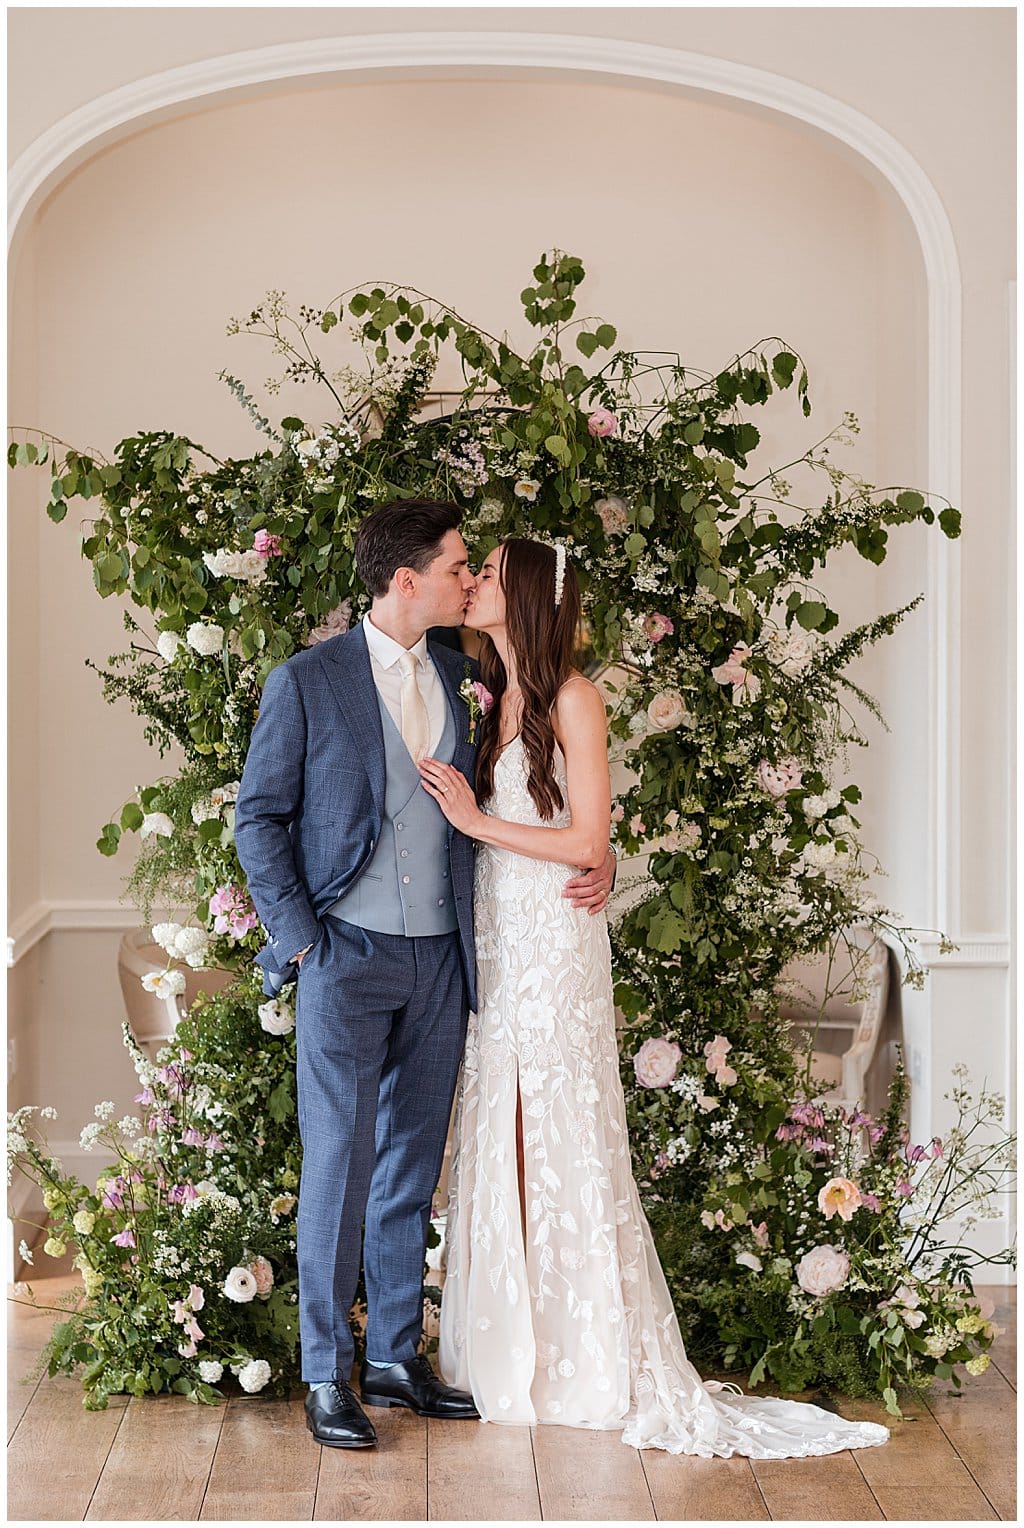 Bride wearing Hermione de Paula kissing Groom in blue three piece suit, standing in front of a floral arch backdrop in the ceremony room at Alrewas Hayes